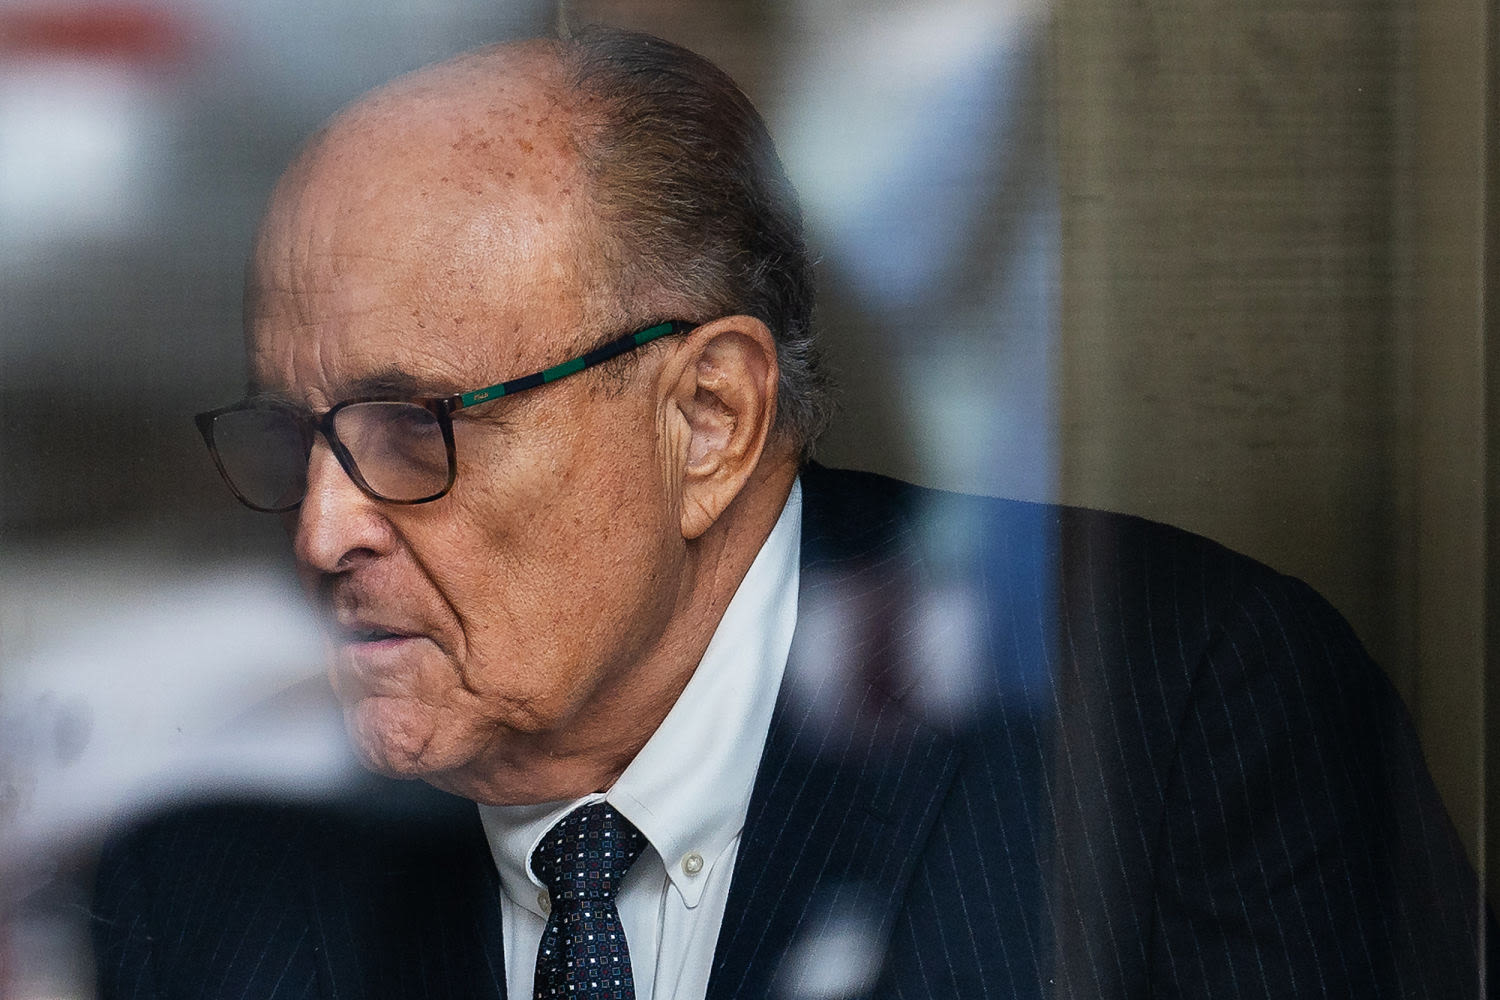 Rudy Giuliani agrees to stop accusing Georgia workers of election fraud